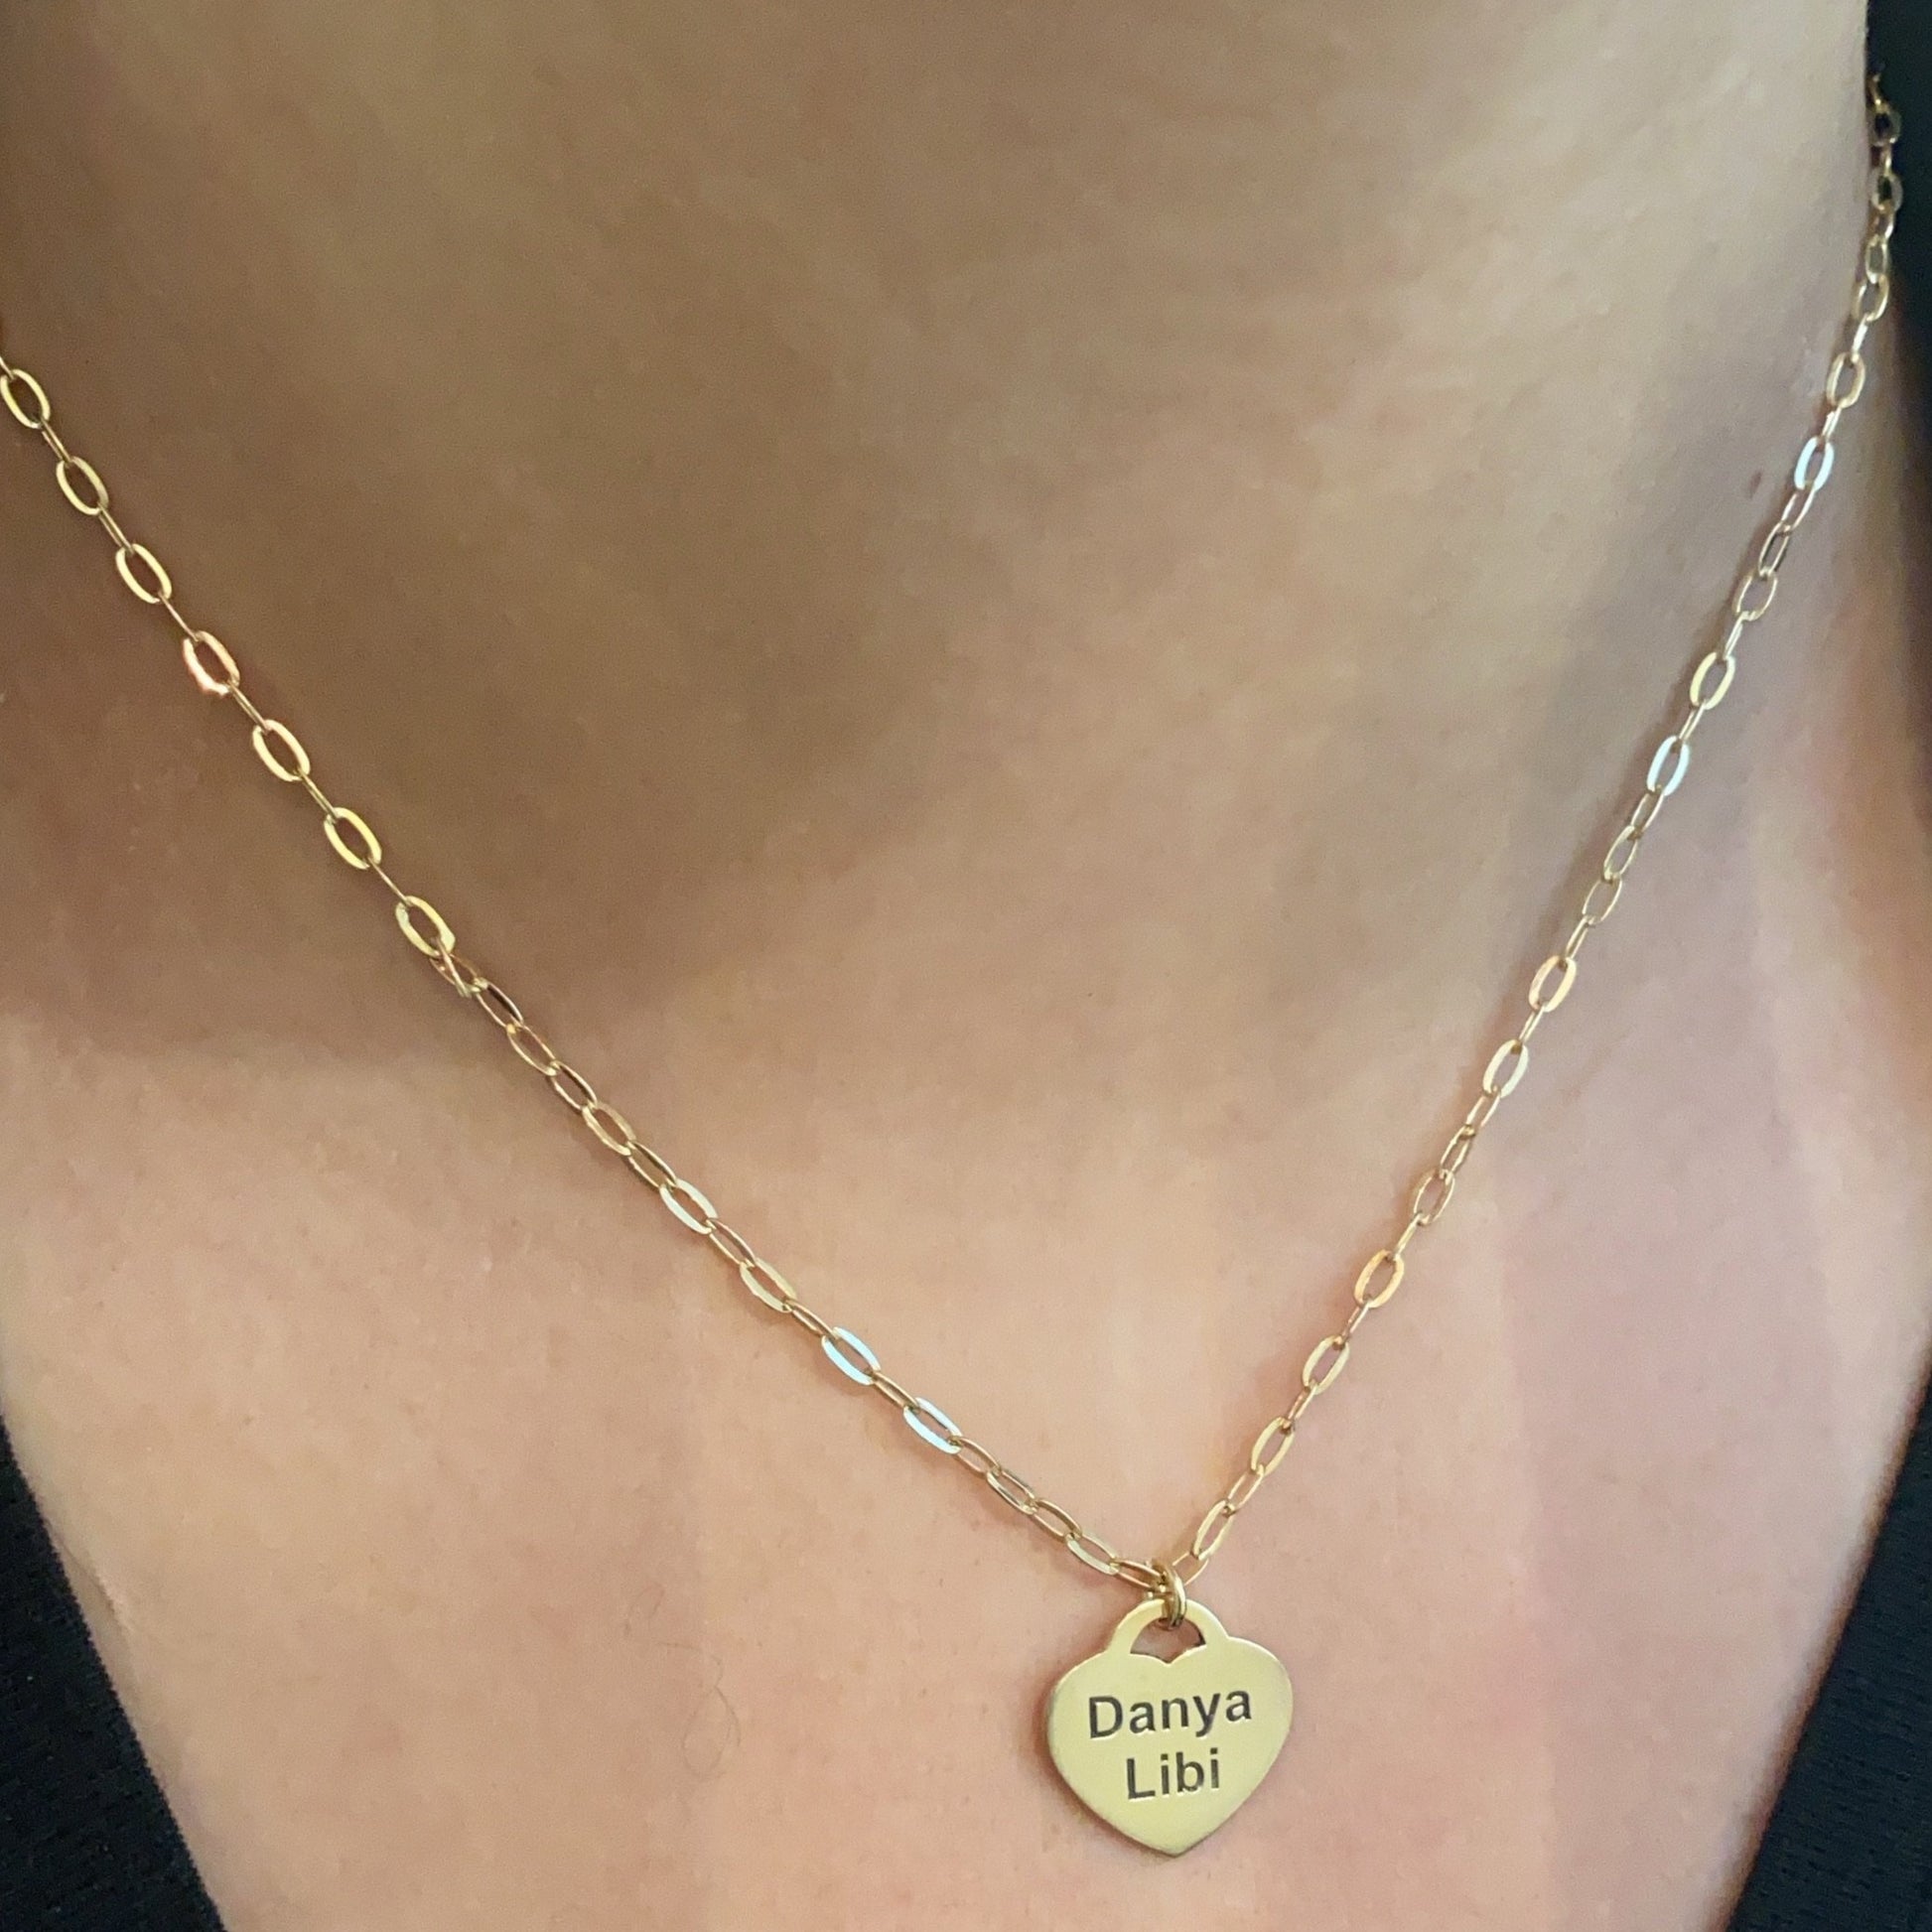 Engraved Heart Charm Necklace - Retail Therapy Jewelry